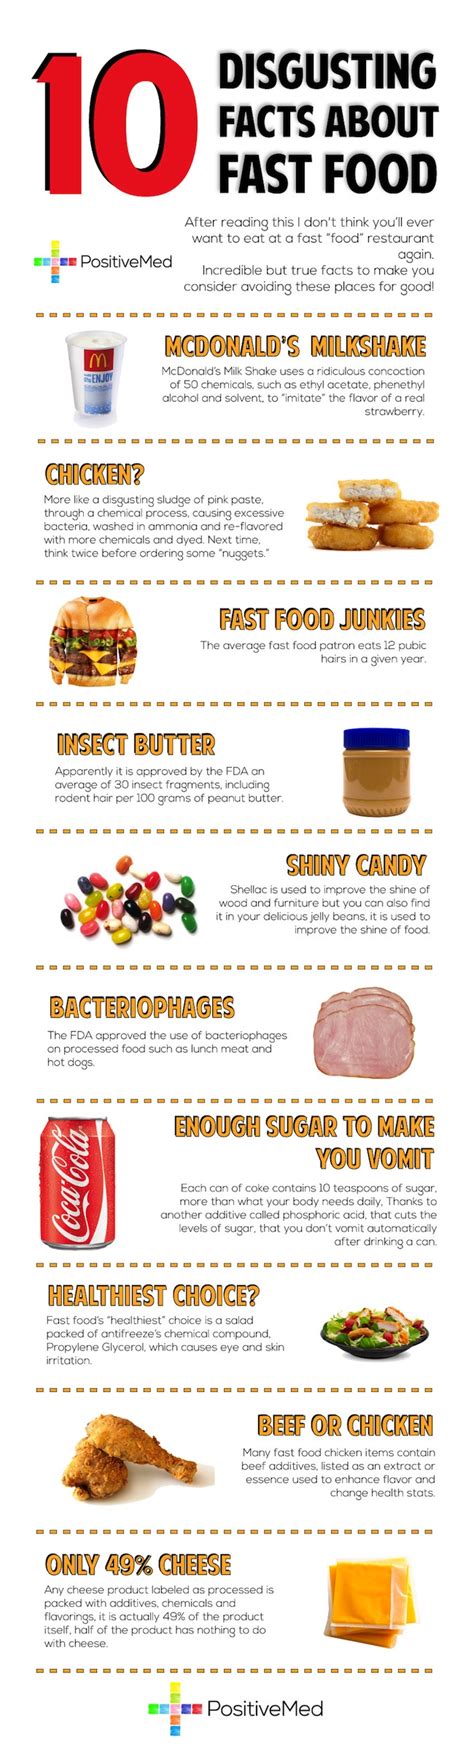 10 Shockingly Disgusting Facts About Fast Food Infographic